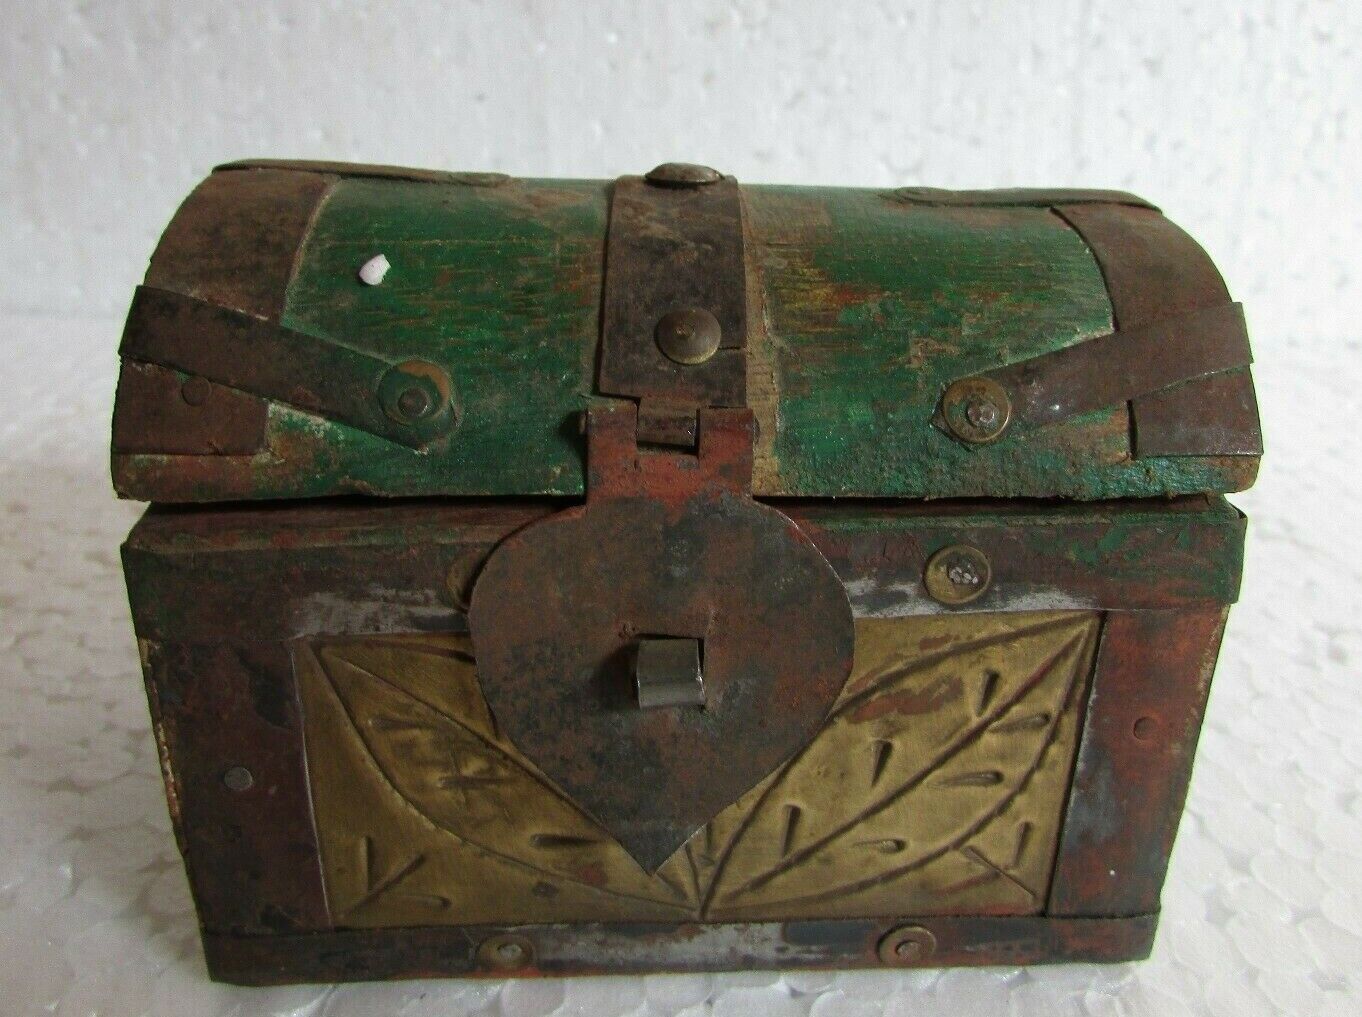 Vintage Old Wooden Handcrafted Iron / Brass Fitted Jewellery Box, Collectible